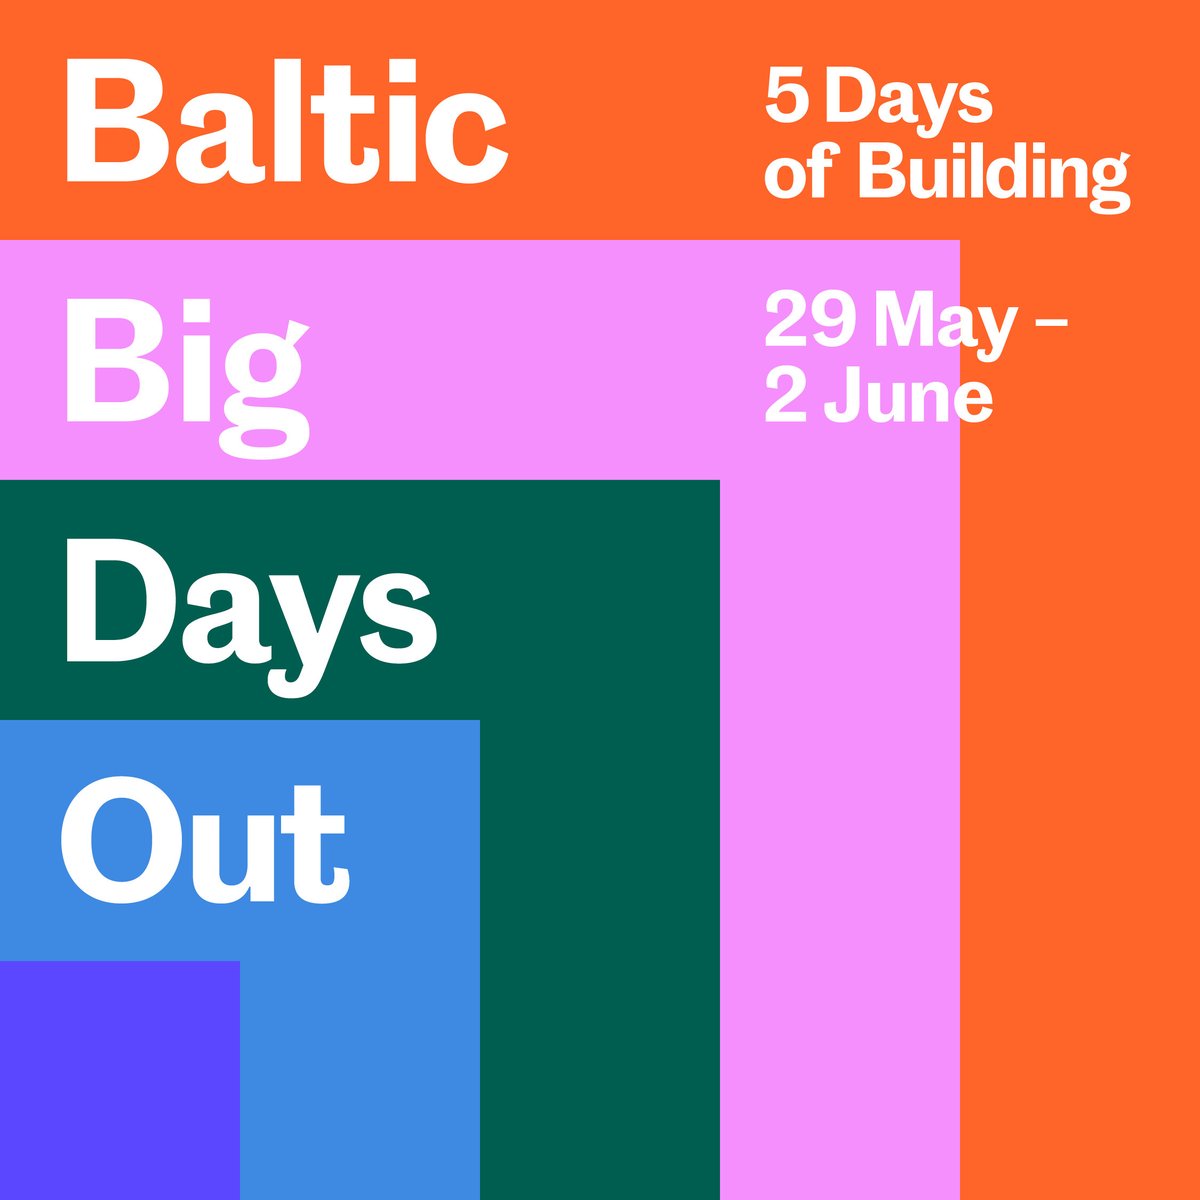 Join us for our next Baltic Big Days Out! Over the May half-term make habitats and dens, develop your crafting skills, build knowledge of our natural world and forge friendships along the way. Wed 29 May – Sun 2 June | 10am – 6pm Find out more: baltic.art/building